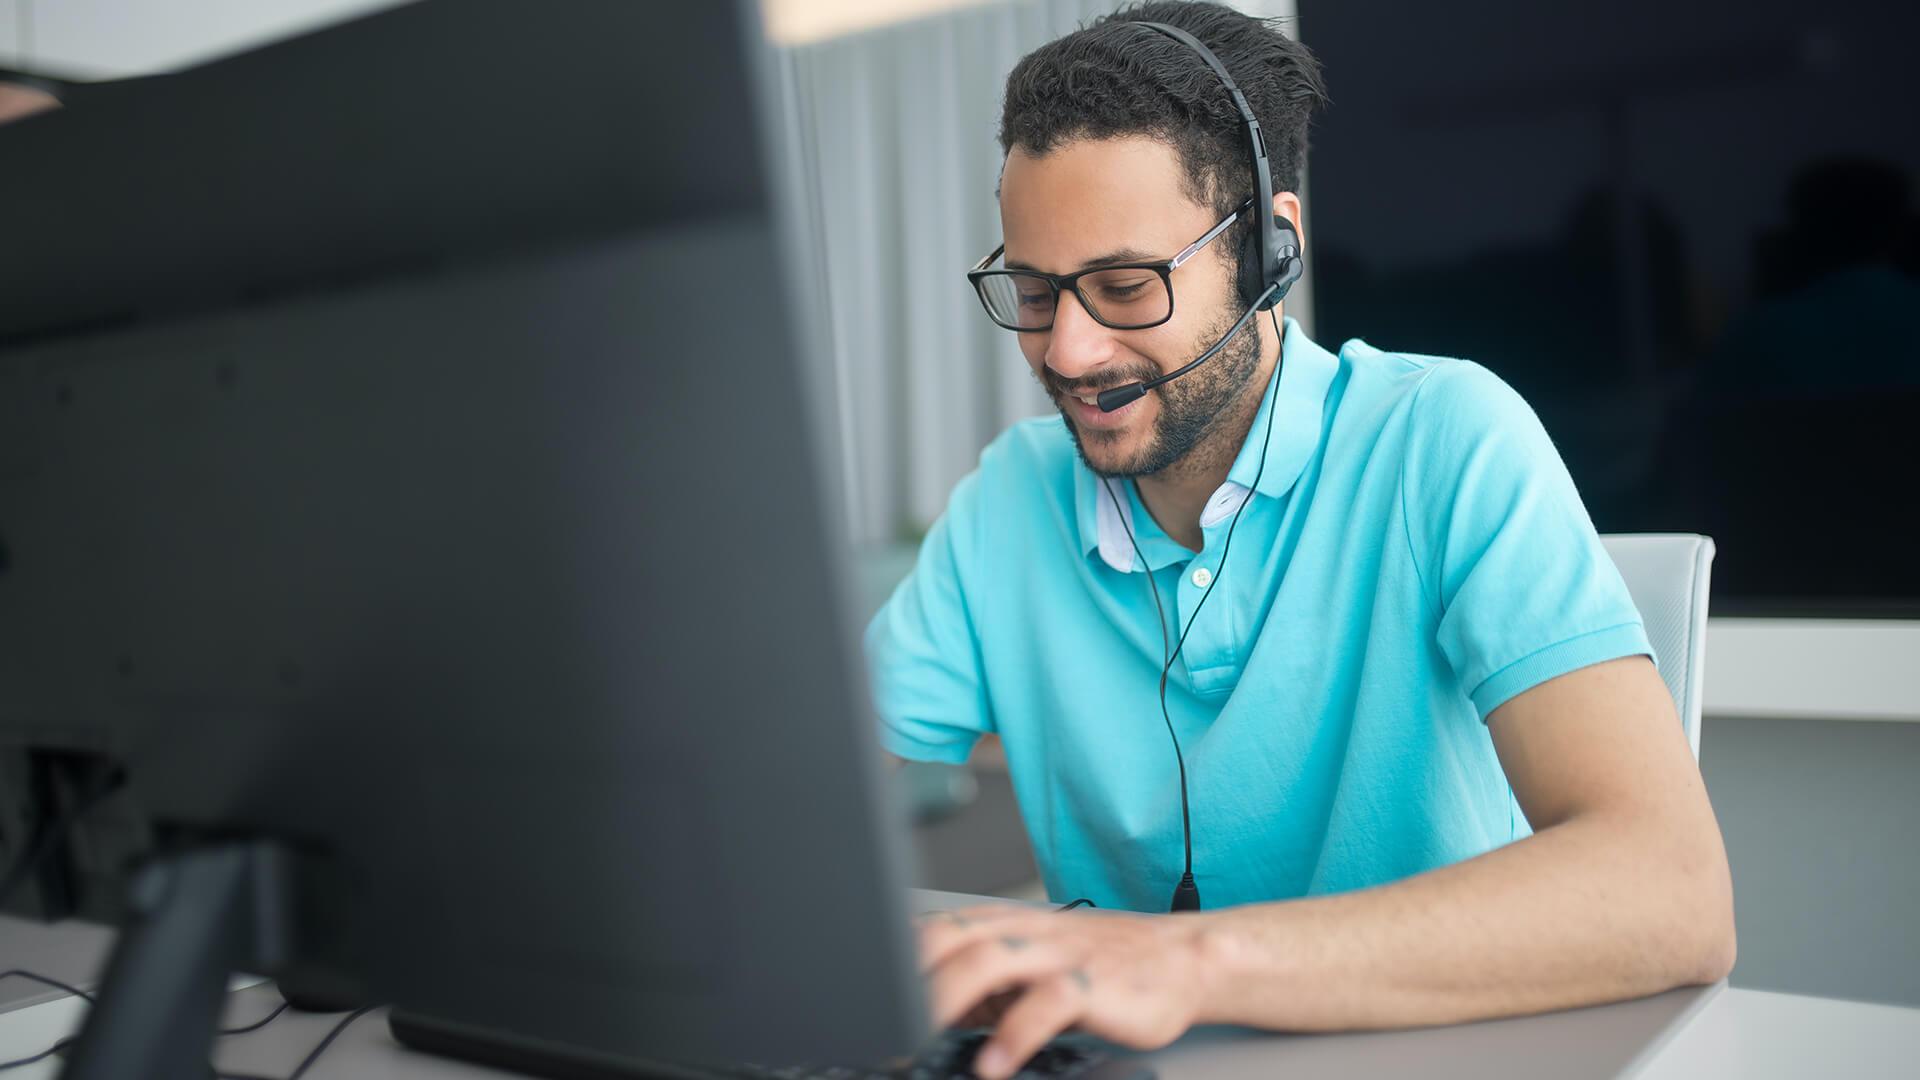 Man with turquoise shirt typing on his computer while talking on headset on phone